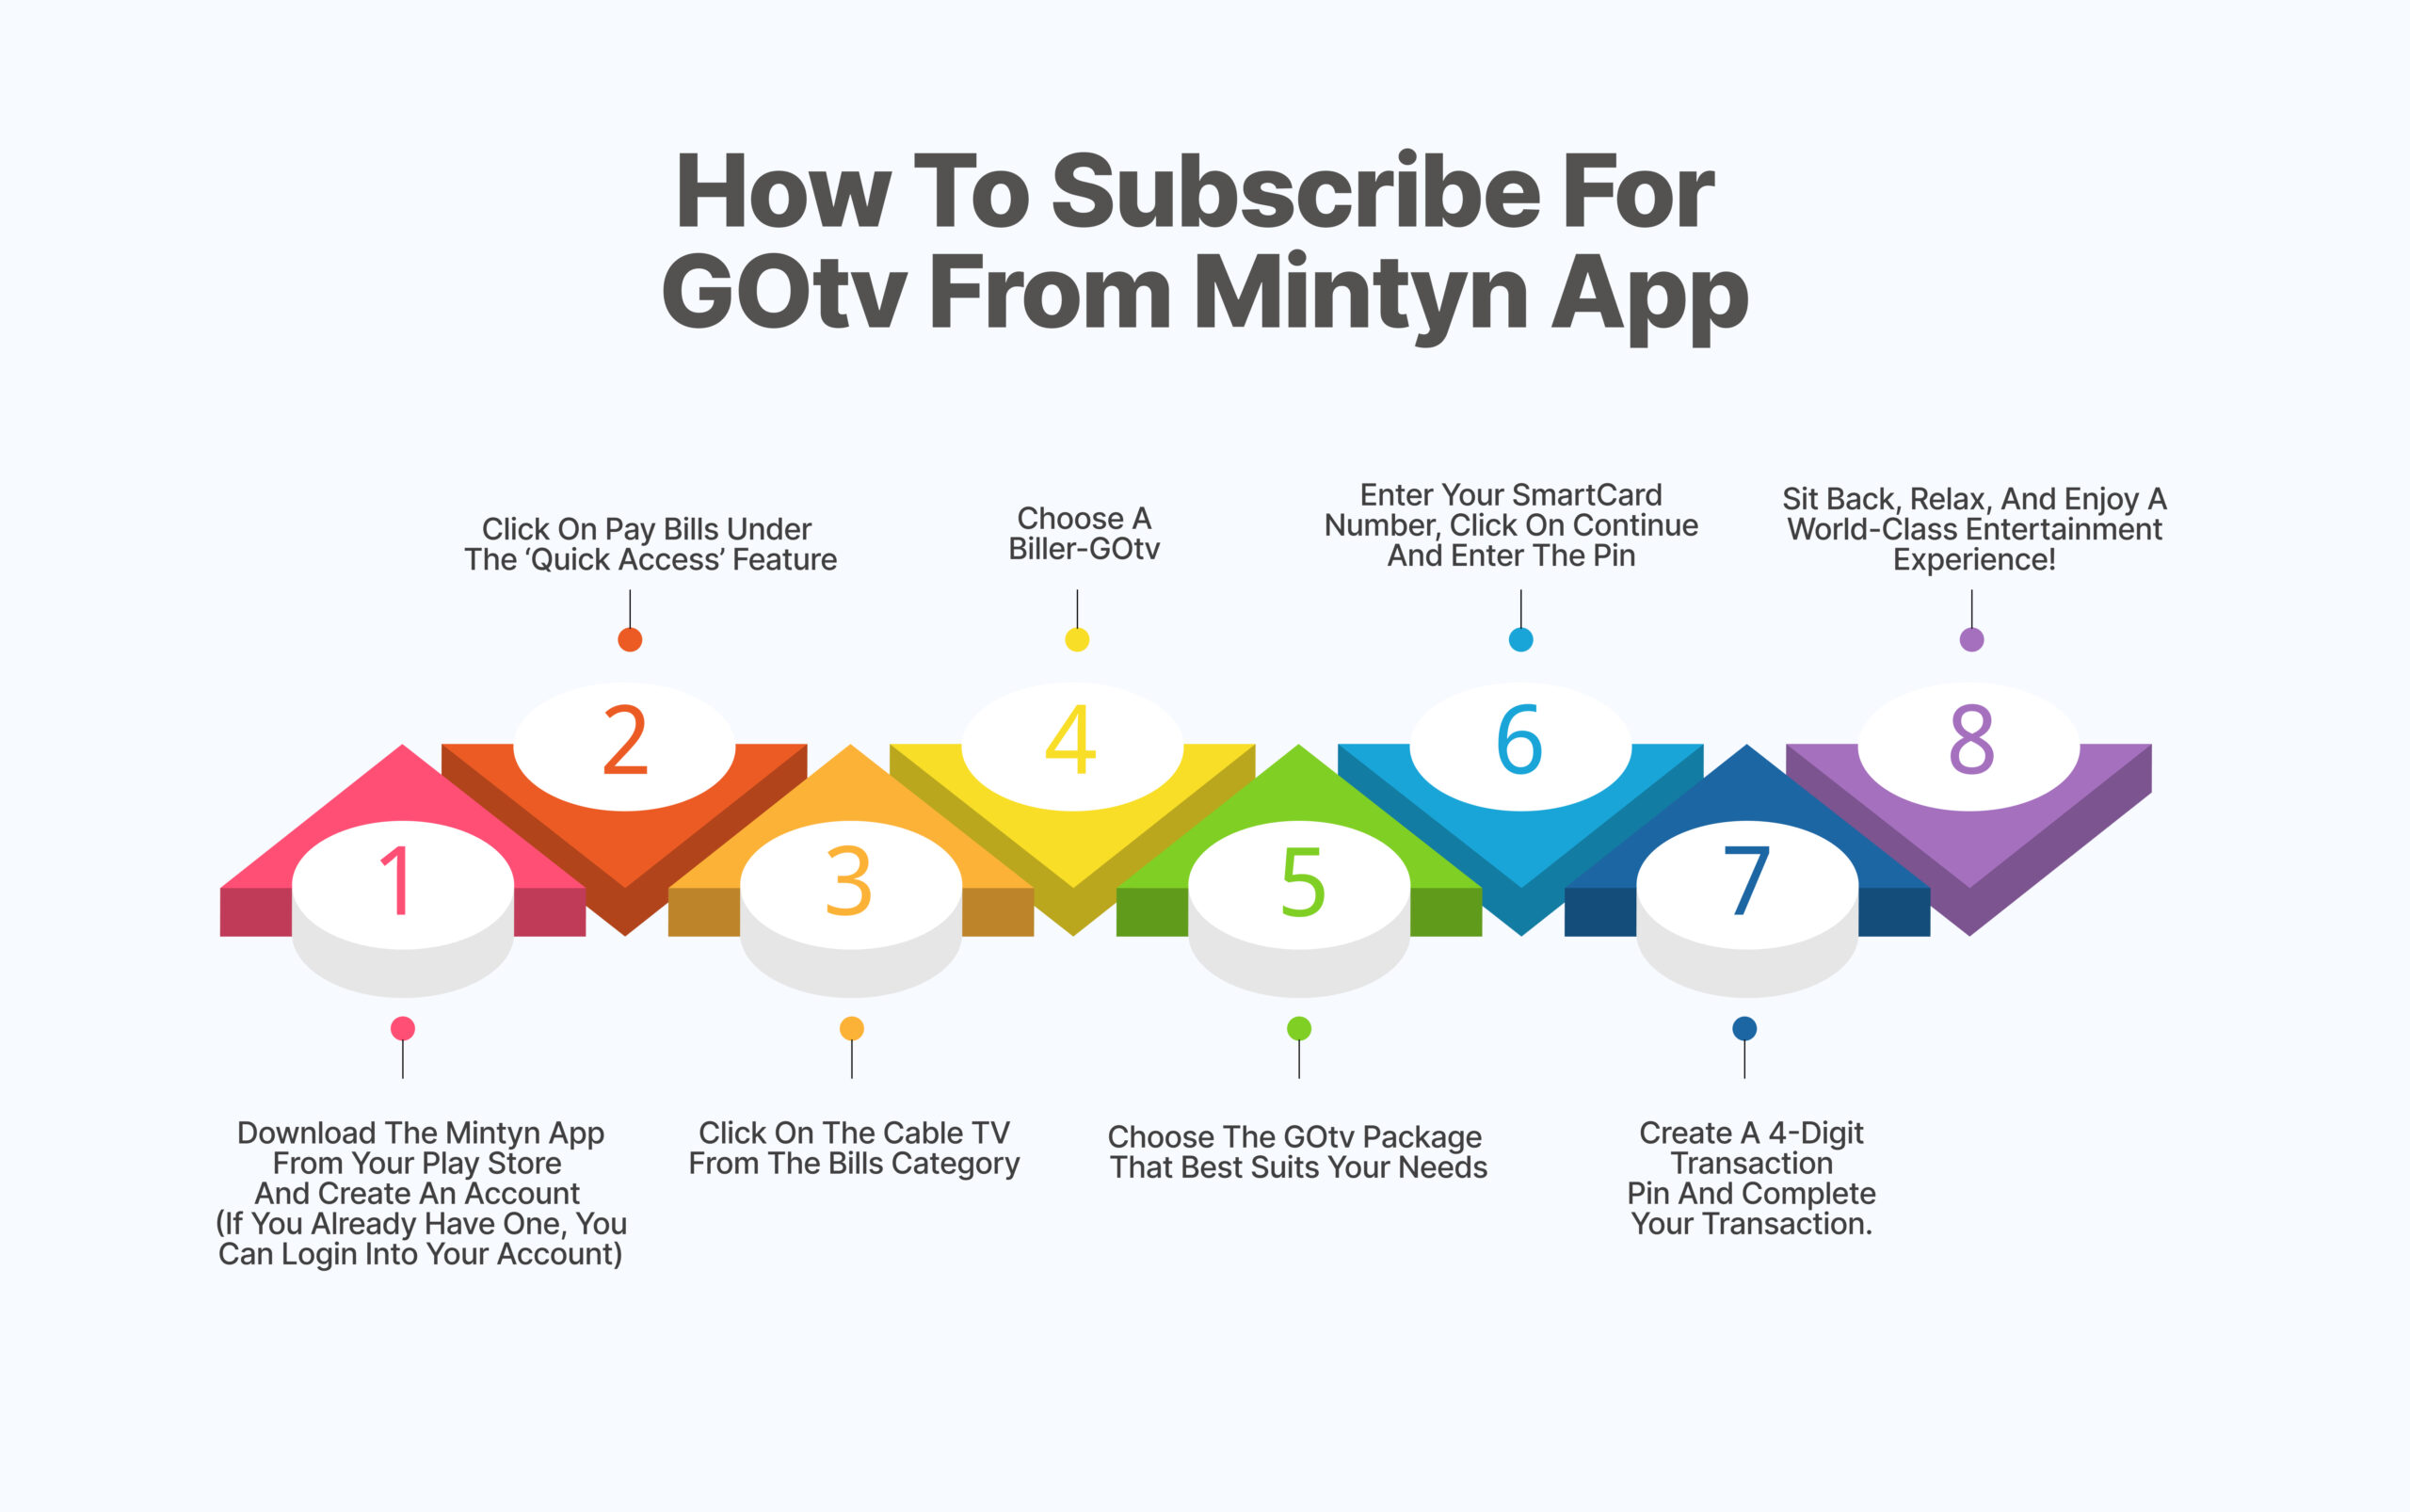 How to subscribe for gotv on mintyn app